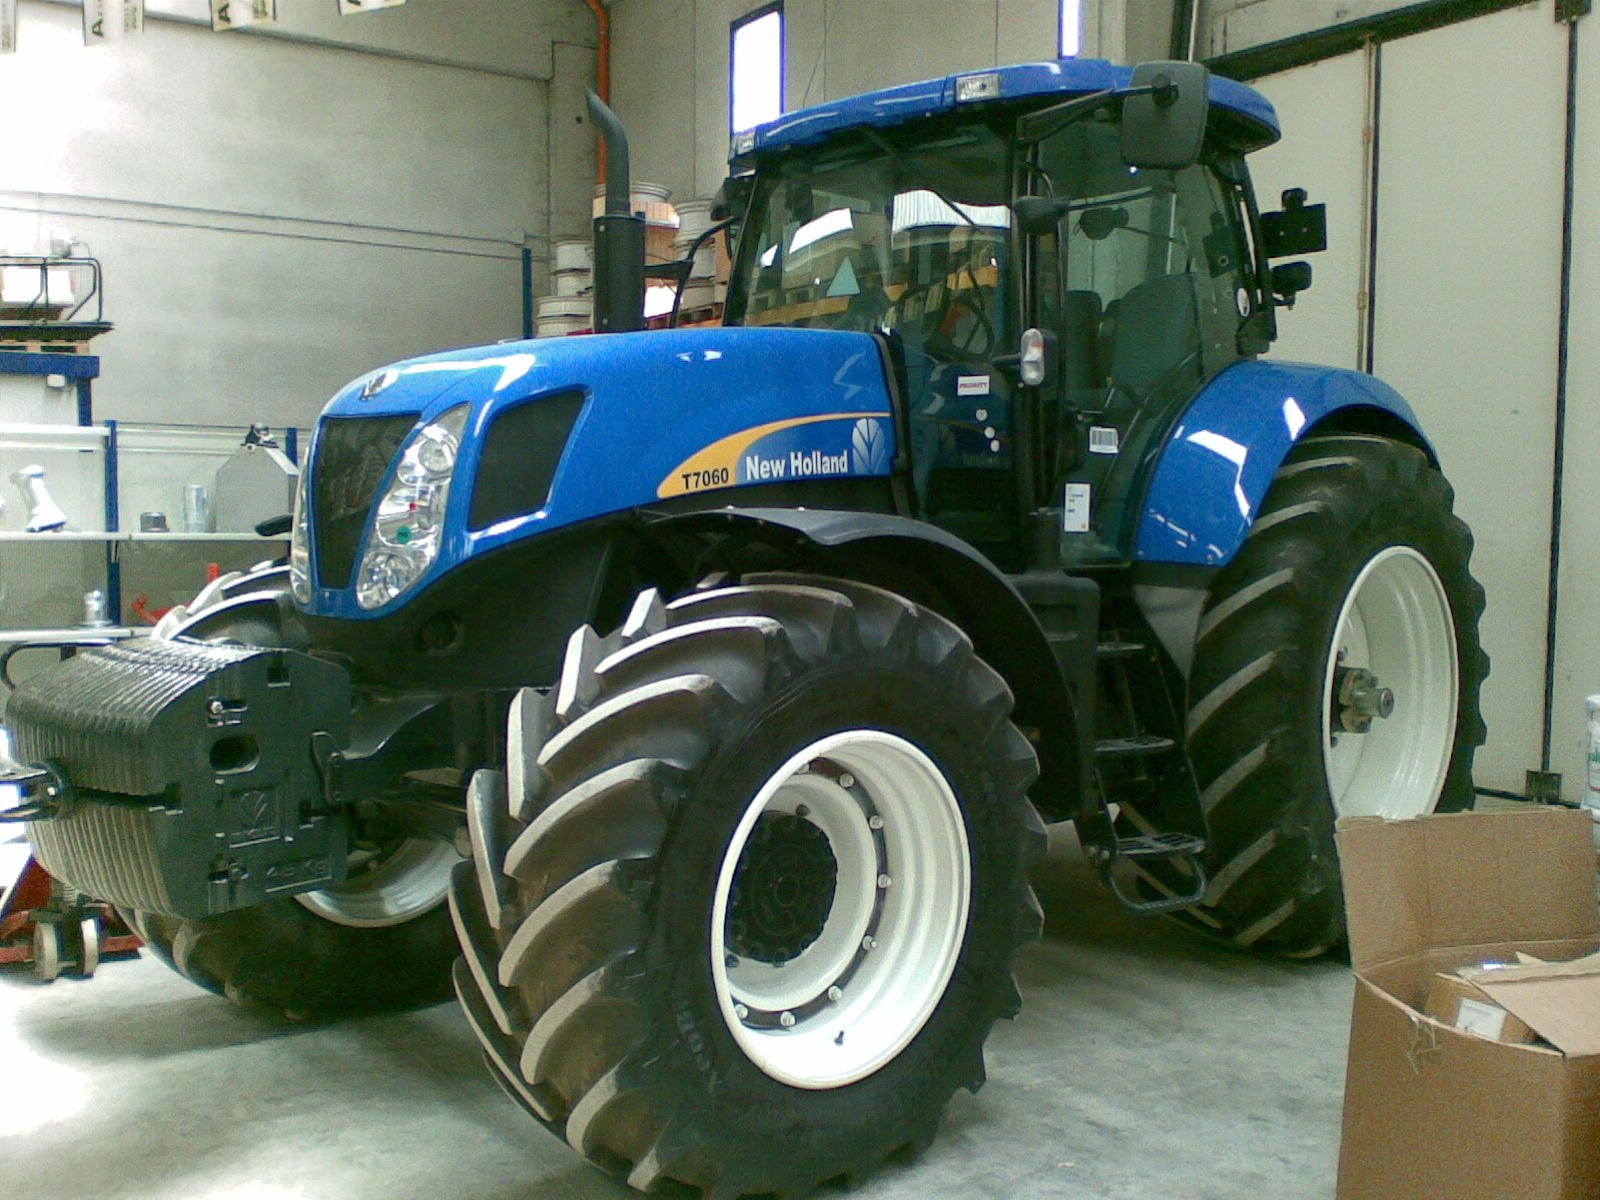 New holland t. Трактор New Holland t7060. Нью Холланд 7060. New Holland t7060 двигатель. Трактор New Holland t7060 габариты.